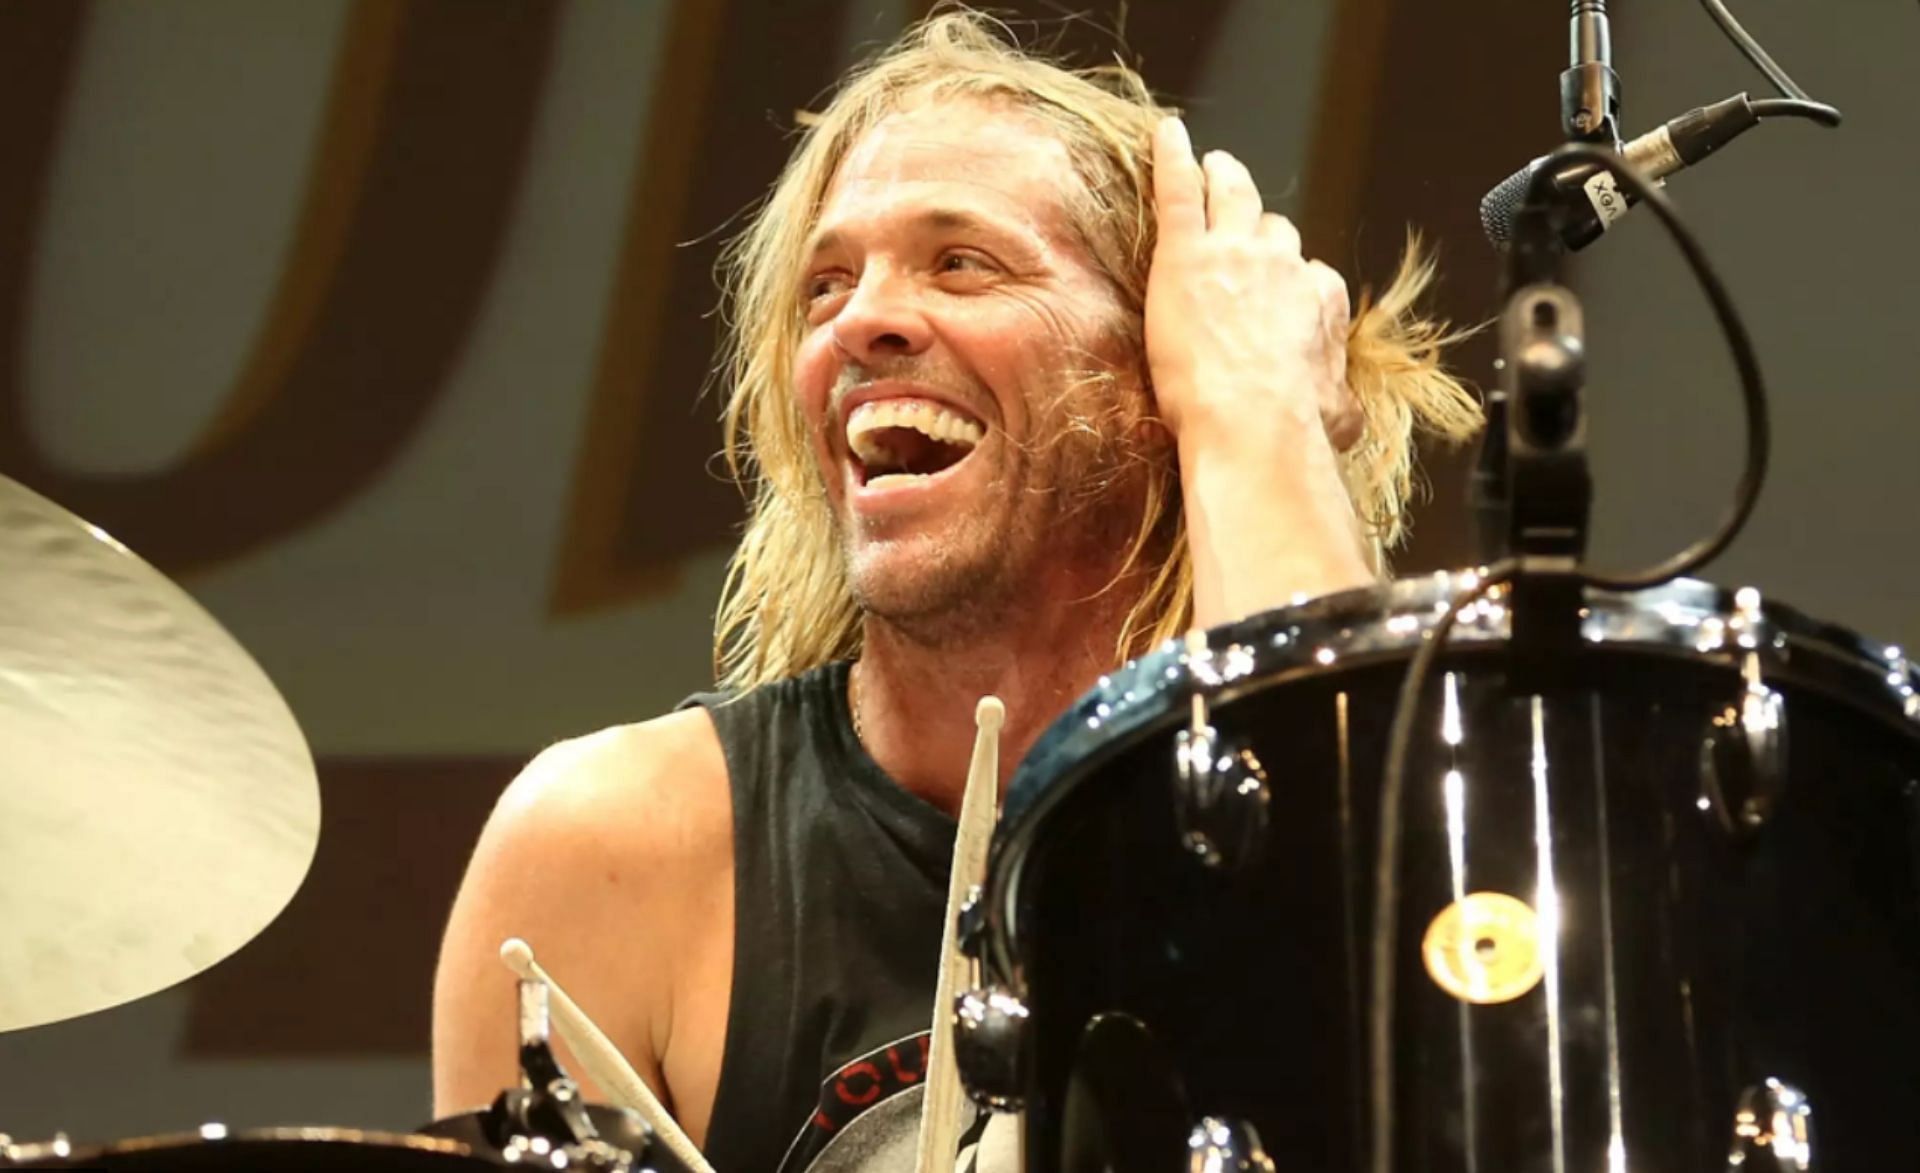 Taylor Hawkins joined Foo Fighters in 1997 (Image via Ashley Believeau/Getty Images)